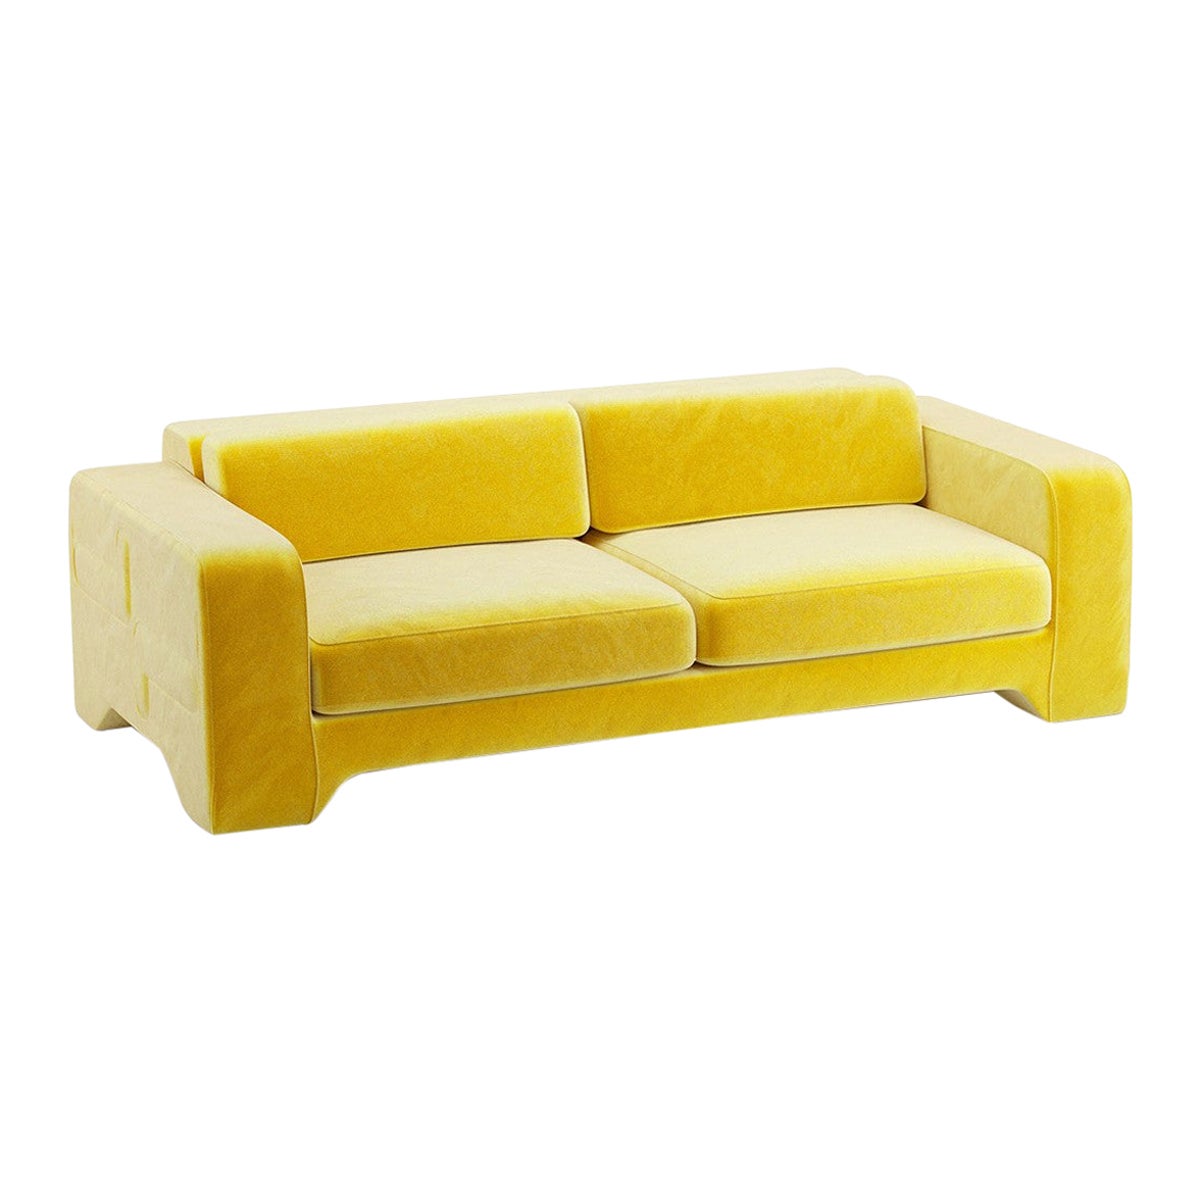 Popus Editions Giovanna 2.5 Seater Sofa in Yellow Verone Velvet Upholstery For Sale